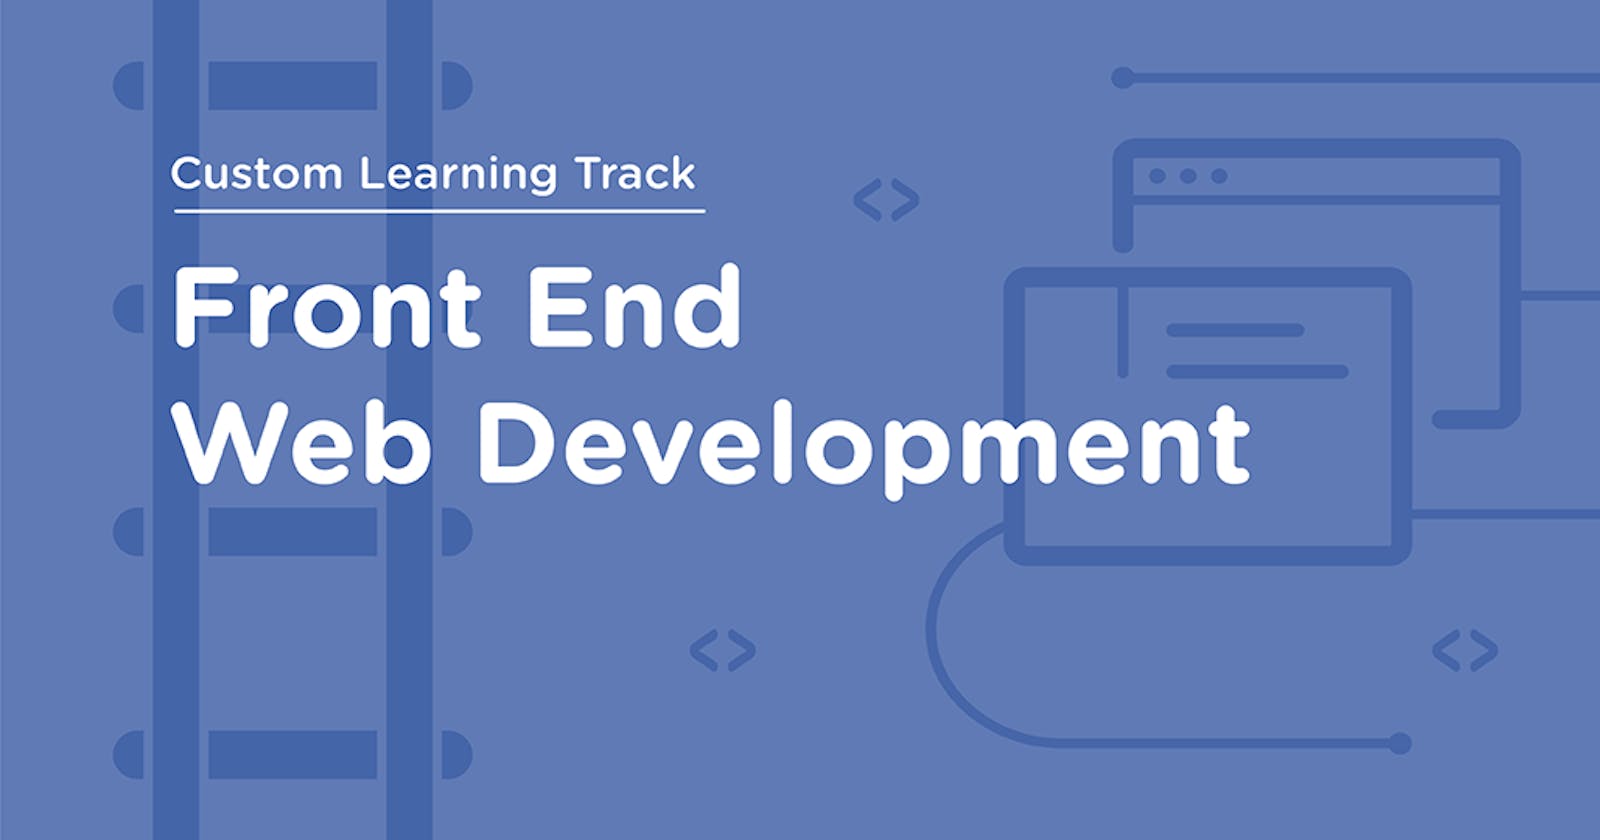 How to get started with Frontend Development